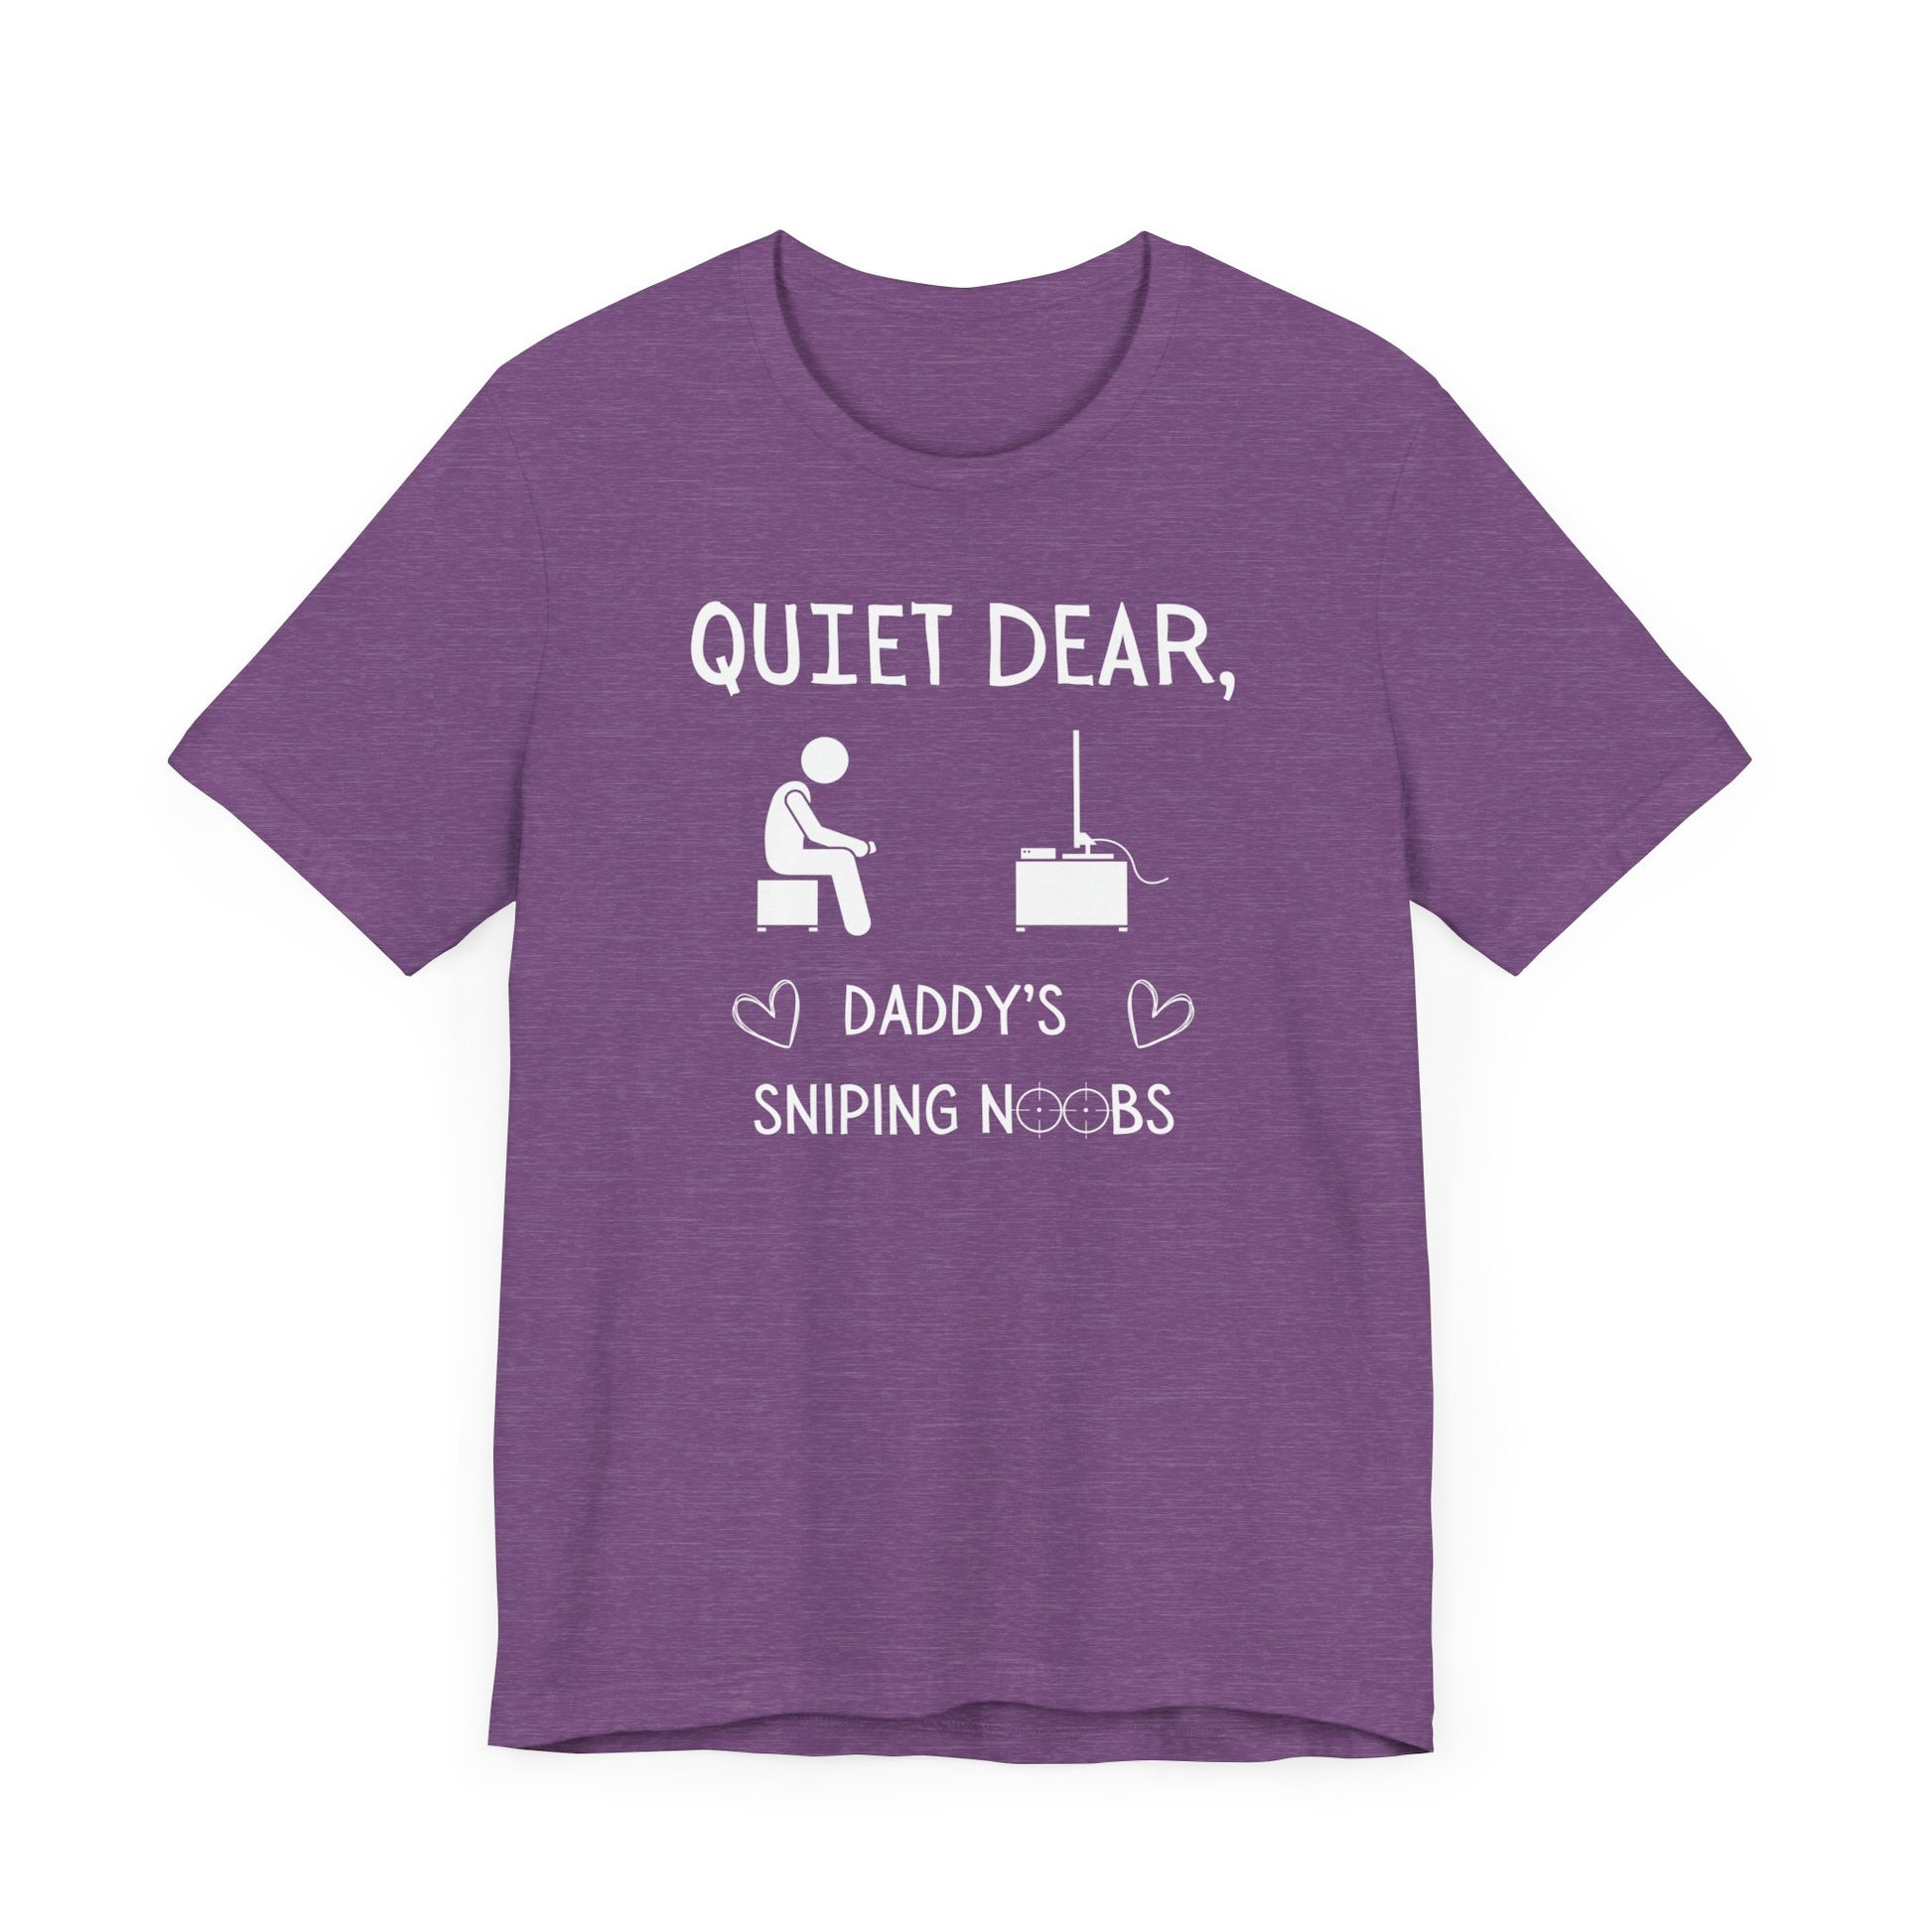 A flat image of a purple heather t-shirt that reads Quiet Dear, Daddy's Sniping Noobs in white text. The lower text is framed by two hearts, and the O's are in the shape of sniper scopes. In the center of the shirt is an image of a person holding a controller sitting across from a TV.